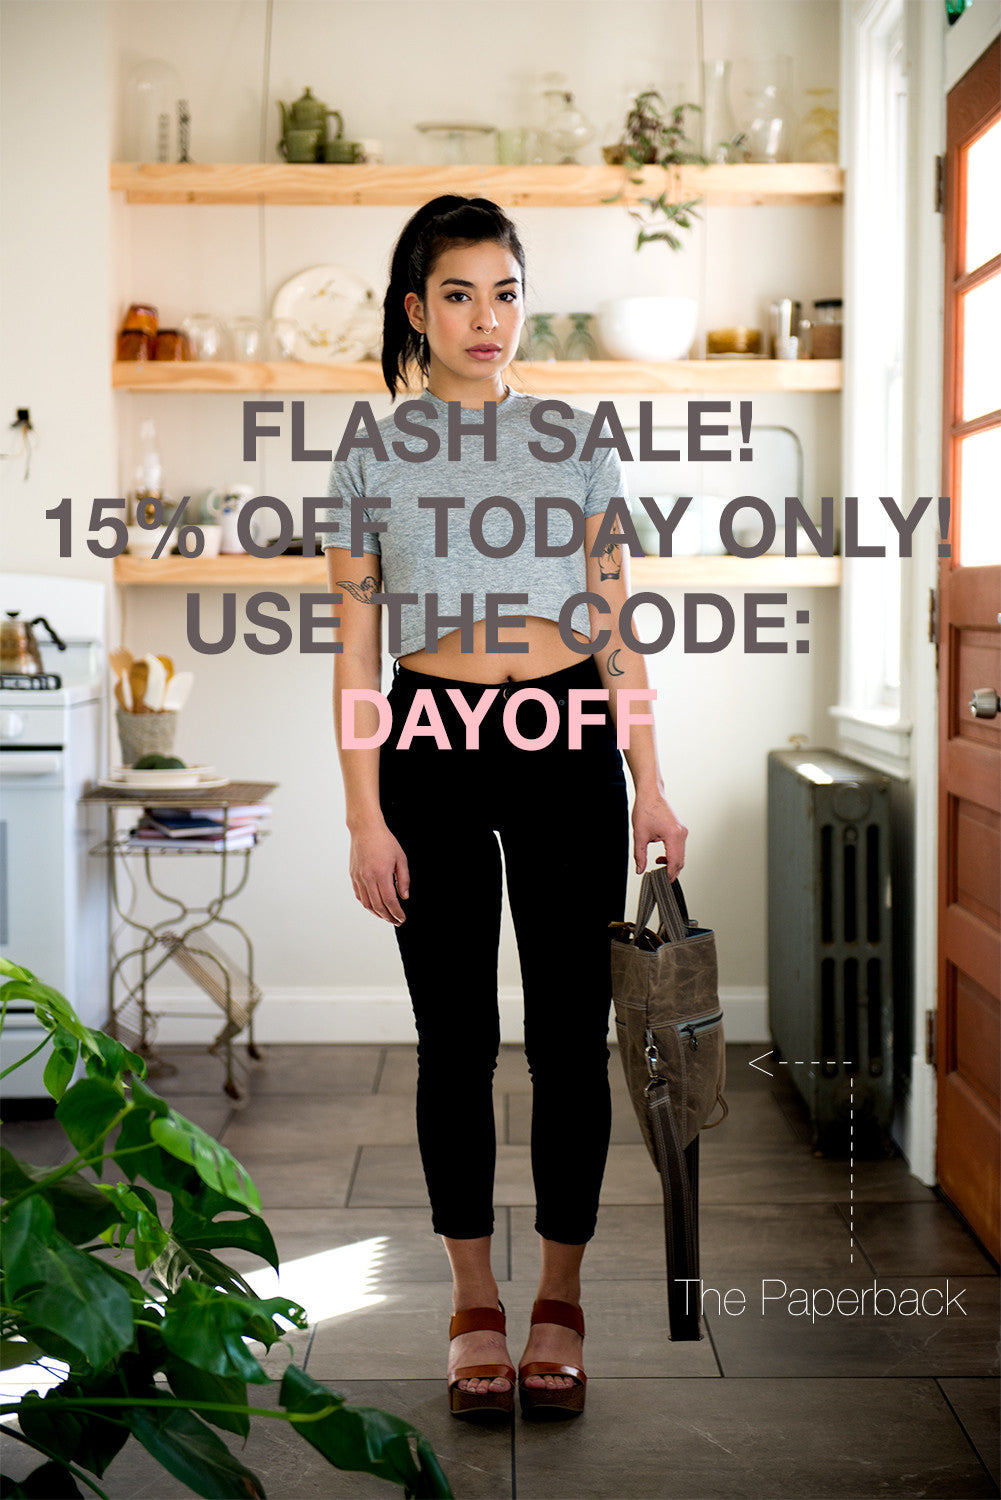 flash sale today only!